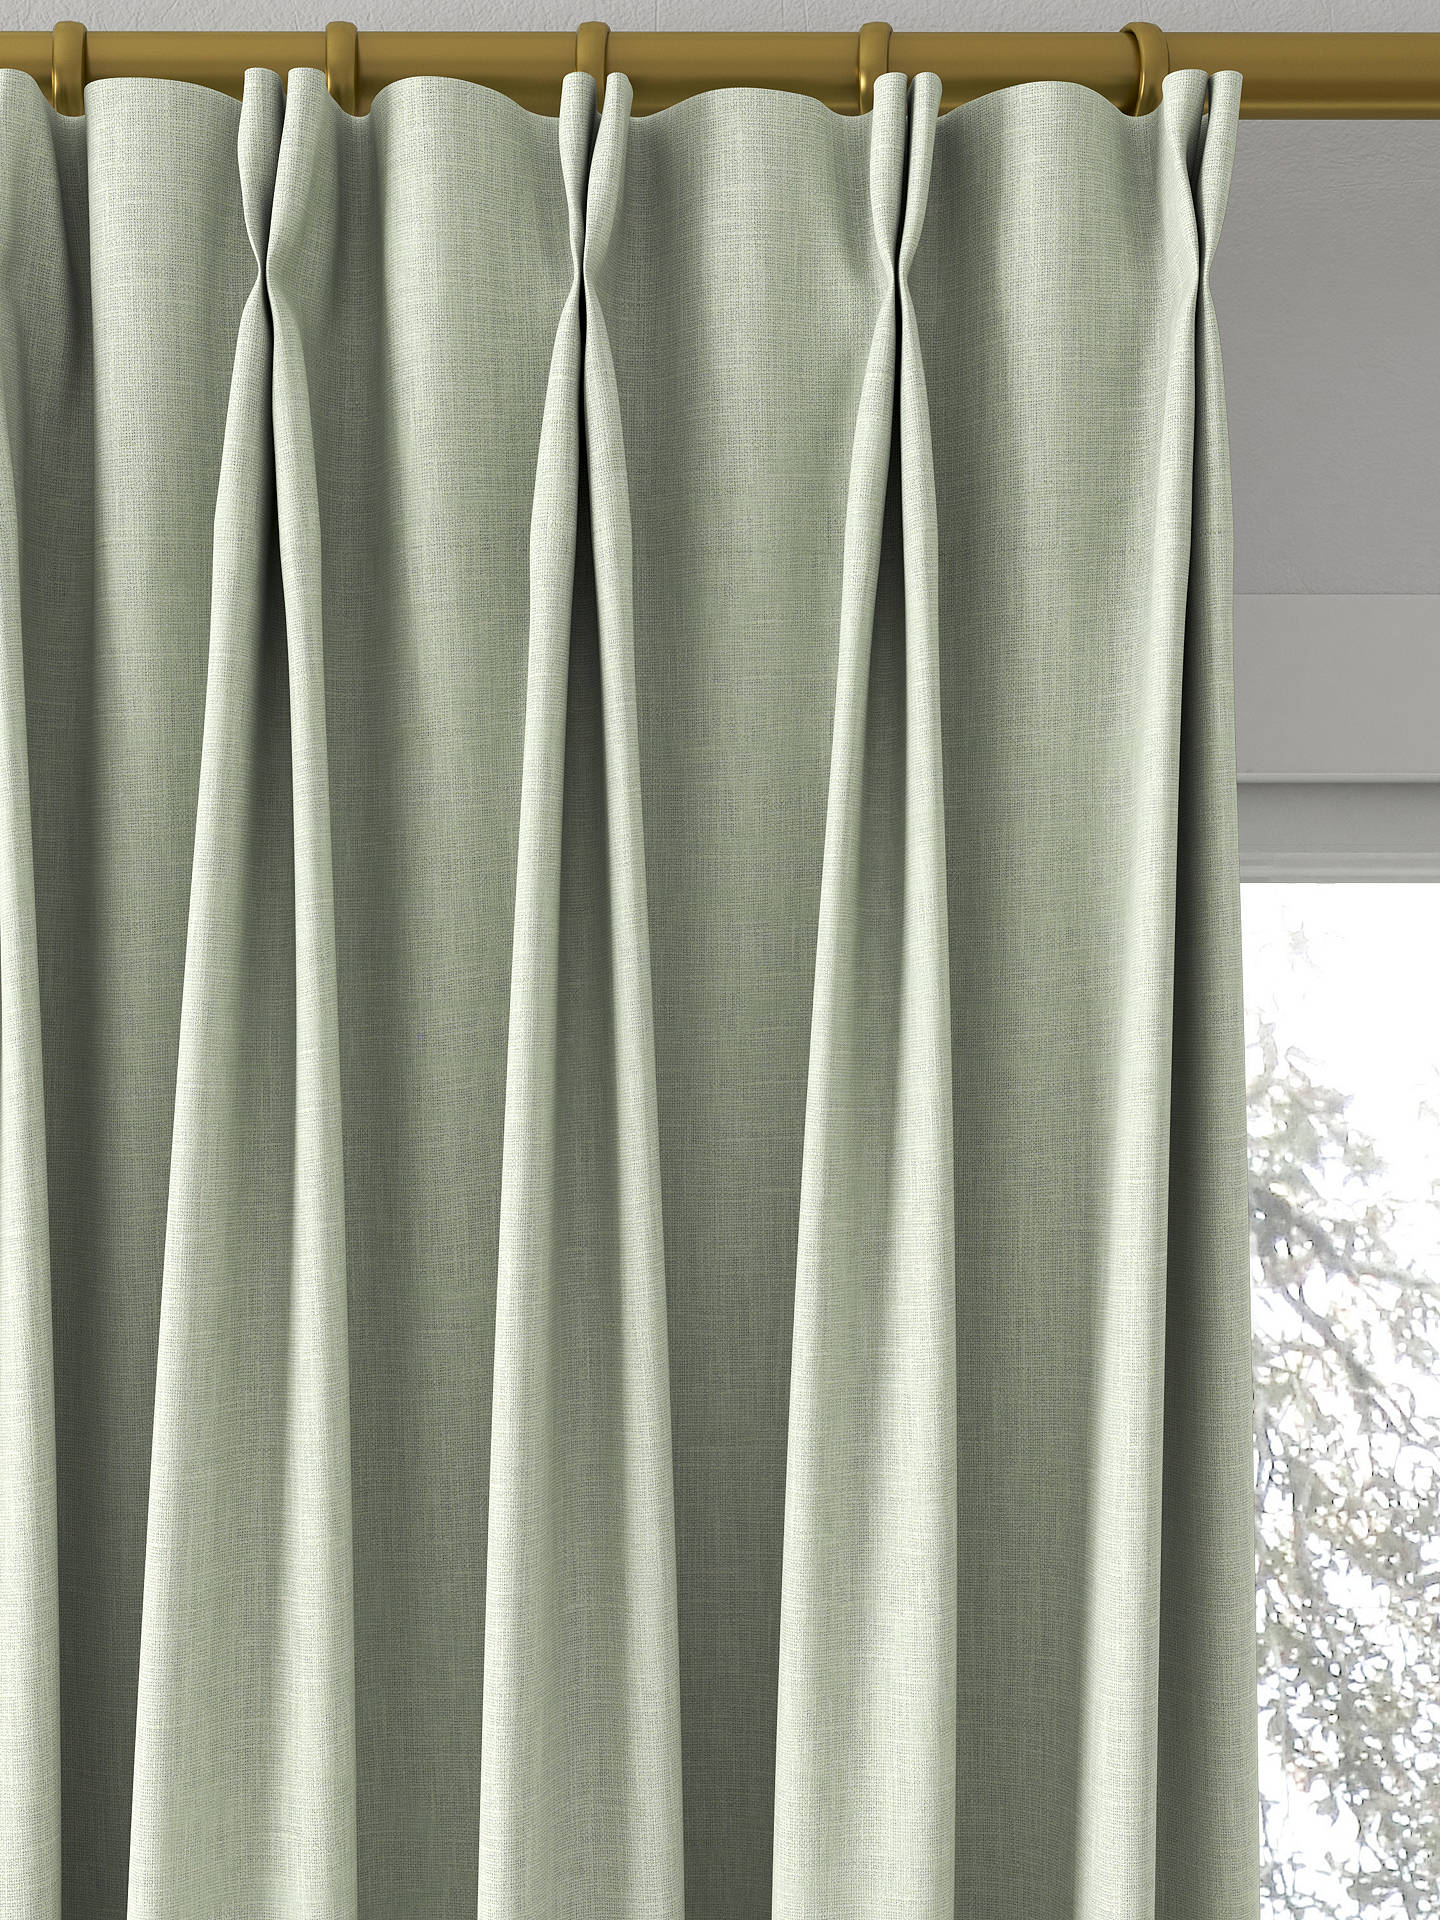 Laura Ashley Easton Made to Measure Curtains, Sage